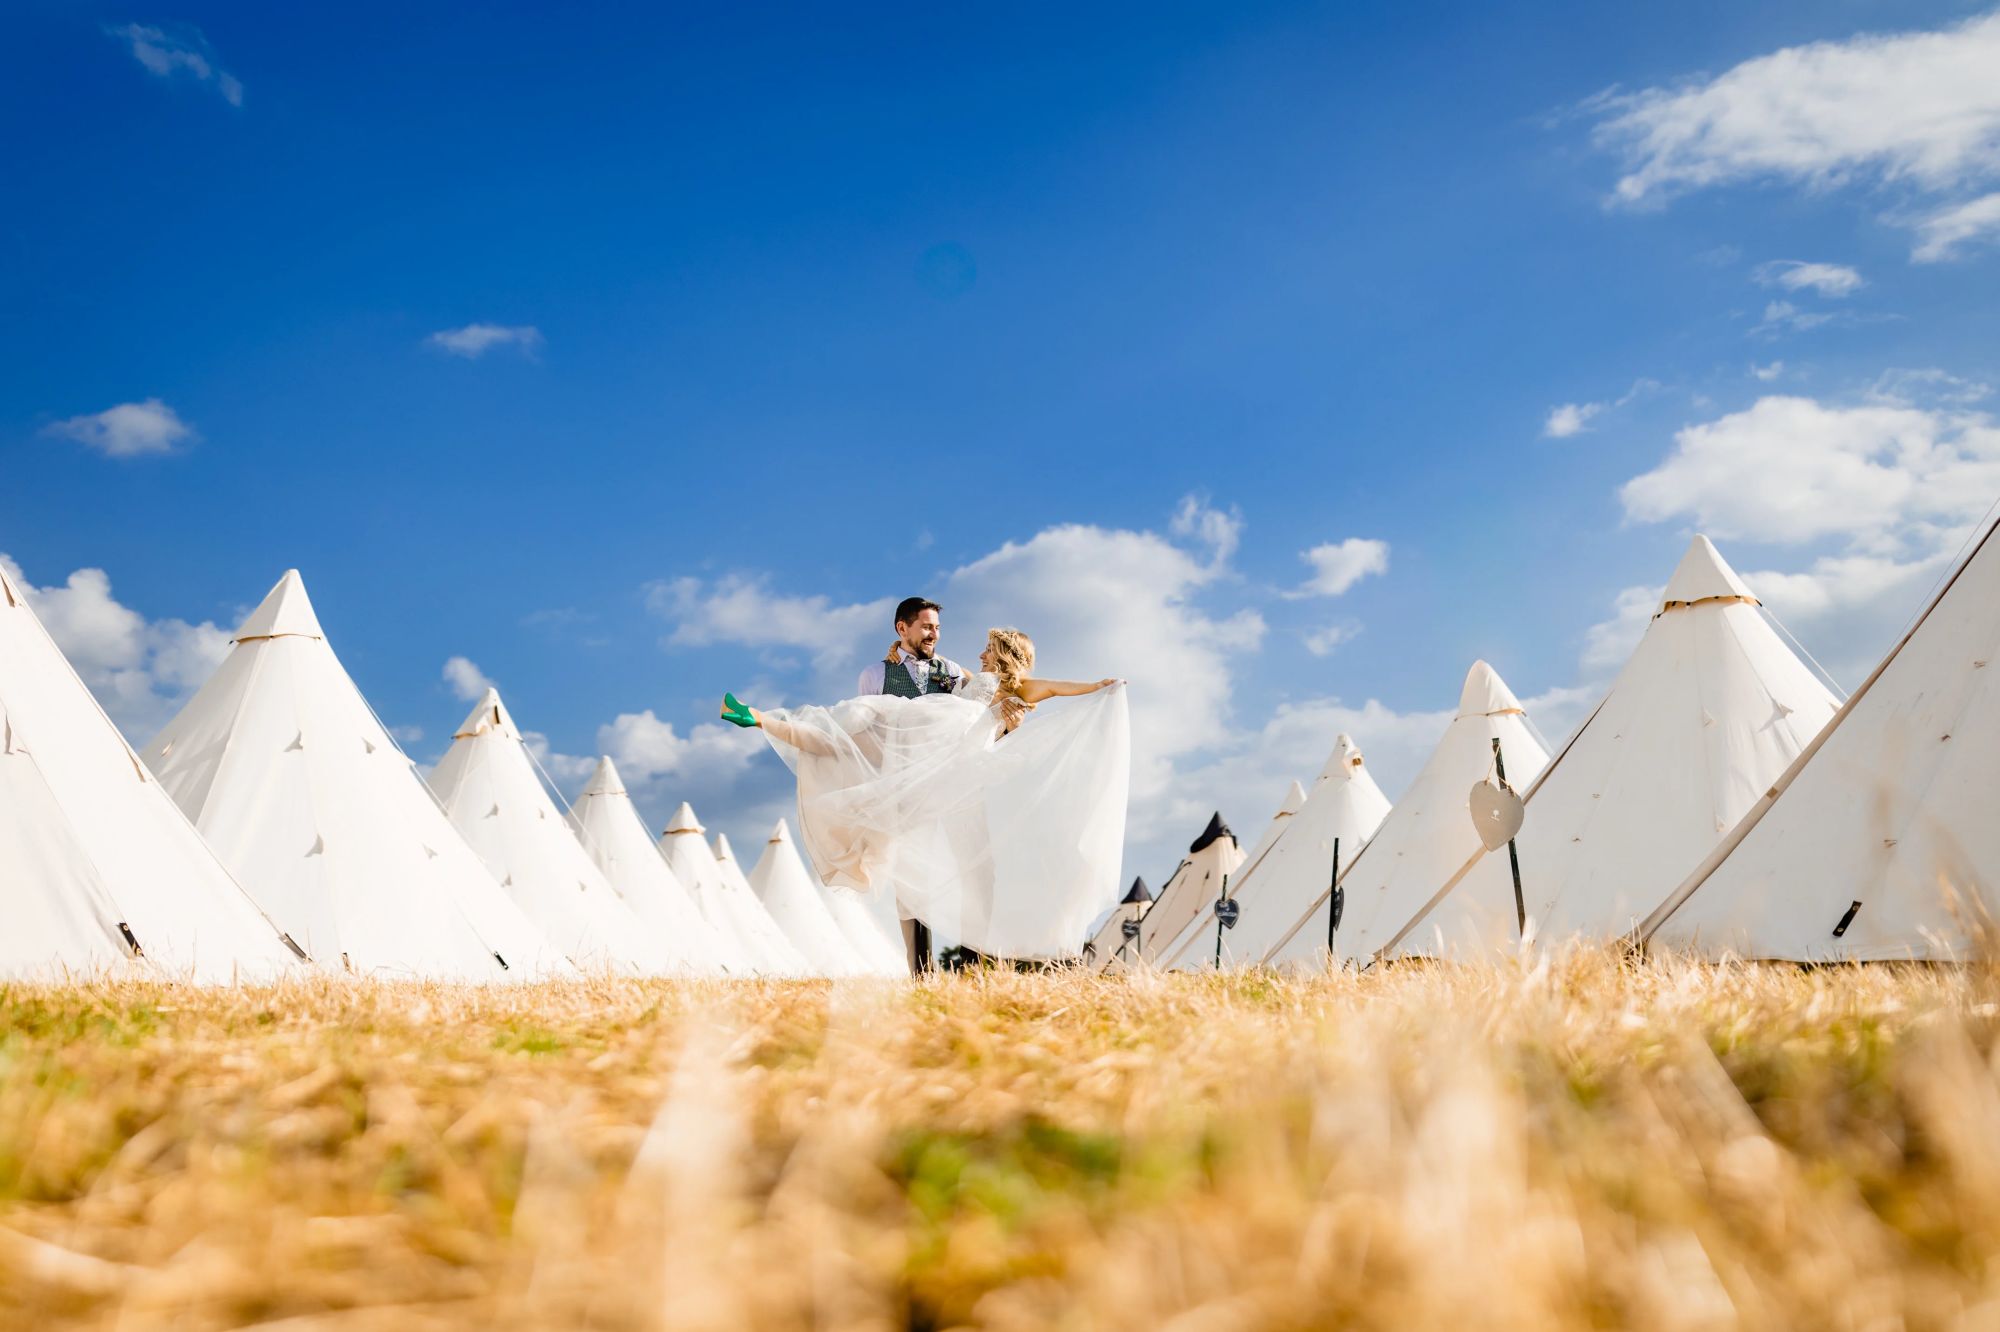 A groom holds his boho bride between two rows of Tipi's under a blue sky in a field of golden grass